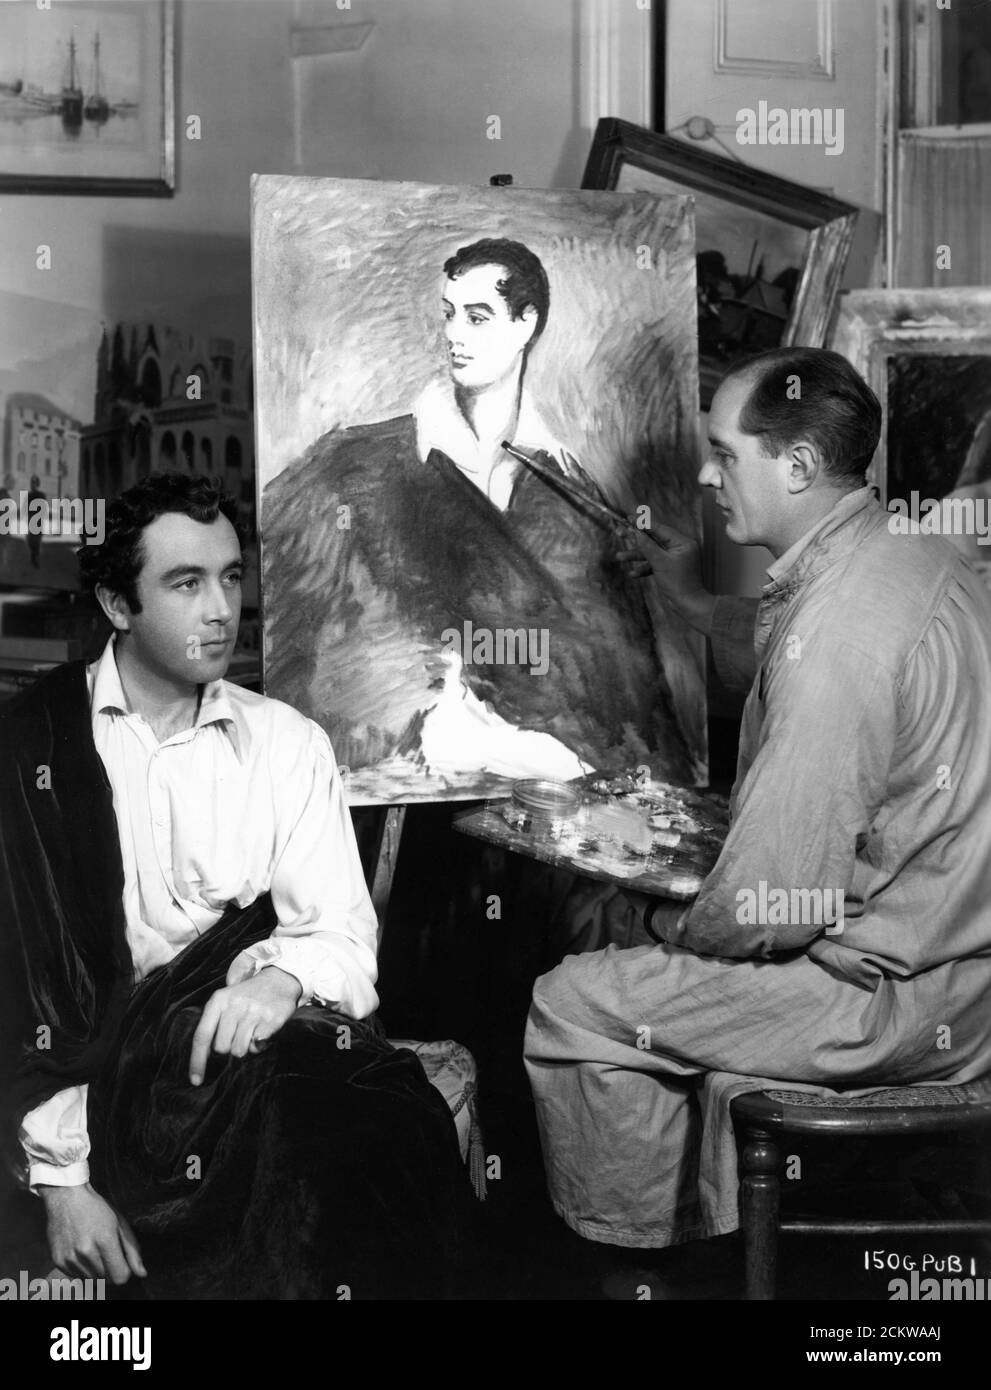 DENNIS PRICE having his  portrait painted as Byron by unidentified artist for THE BAD LORD BYRON 1949 director DAVID MacDONALD Sydney Box Productions / Gainsborough Pictures / General Film Distributors (GFD) Stock Photo